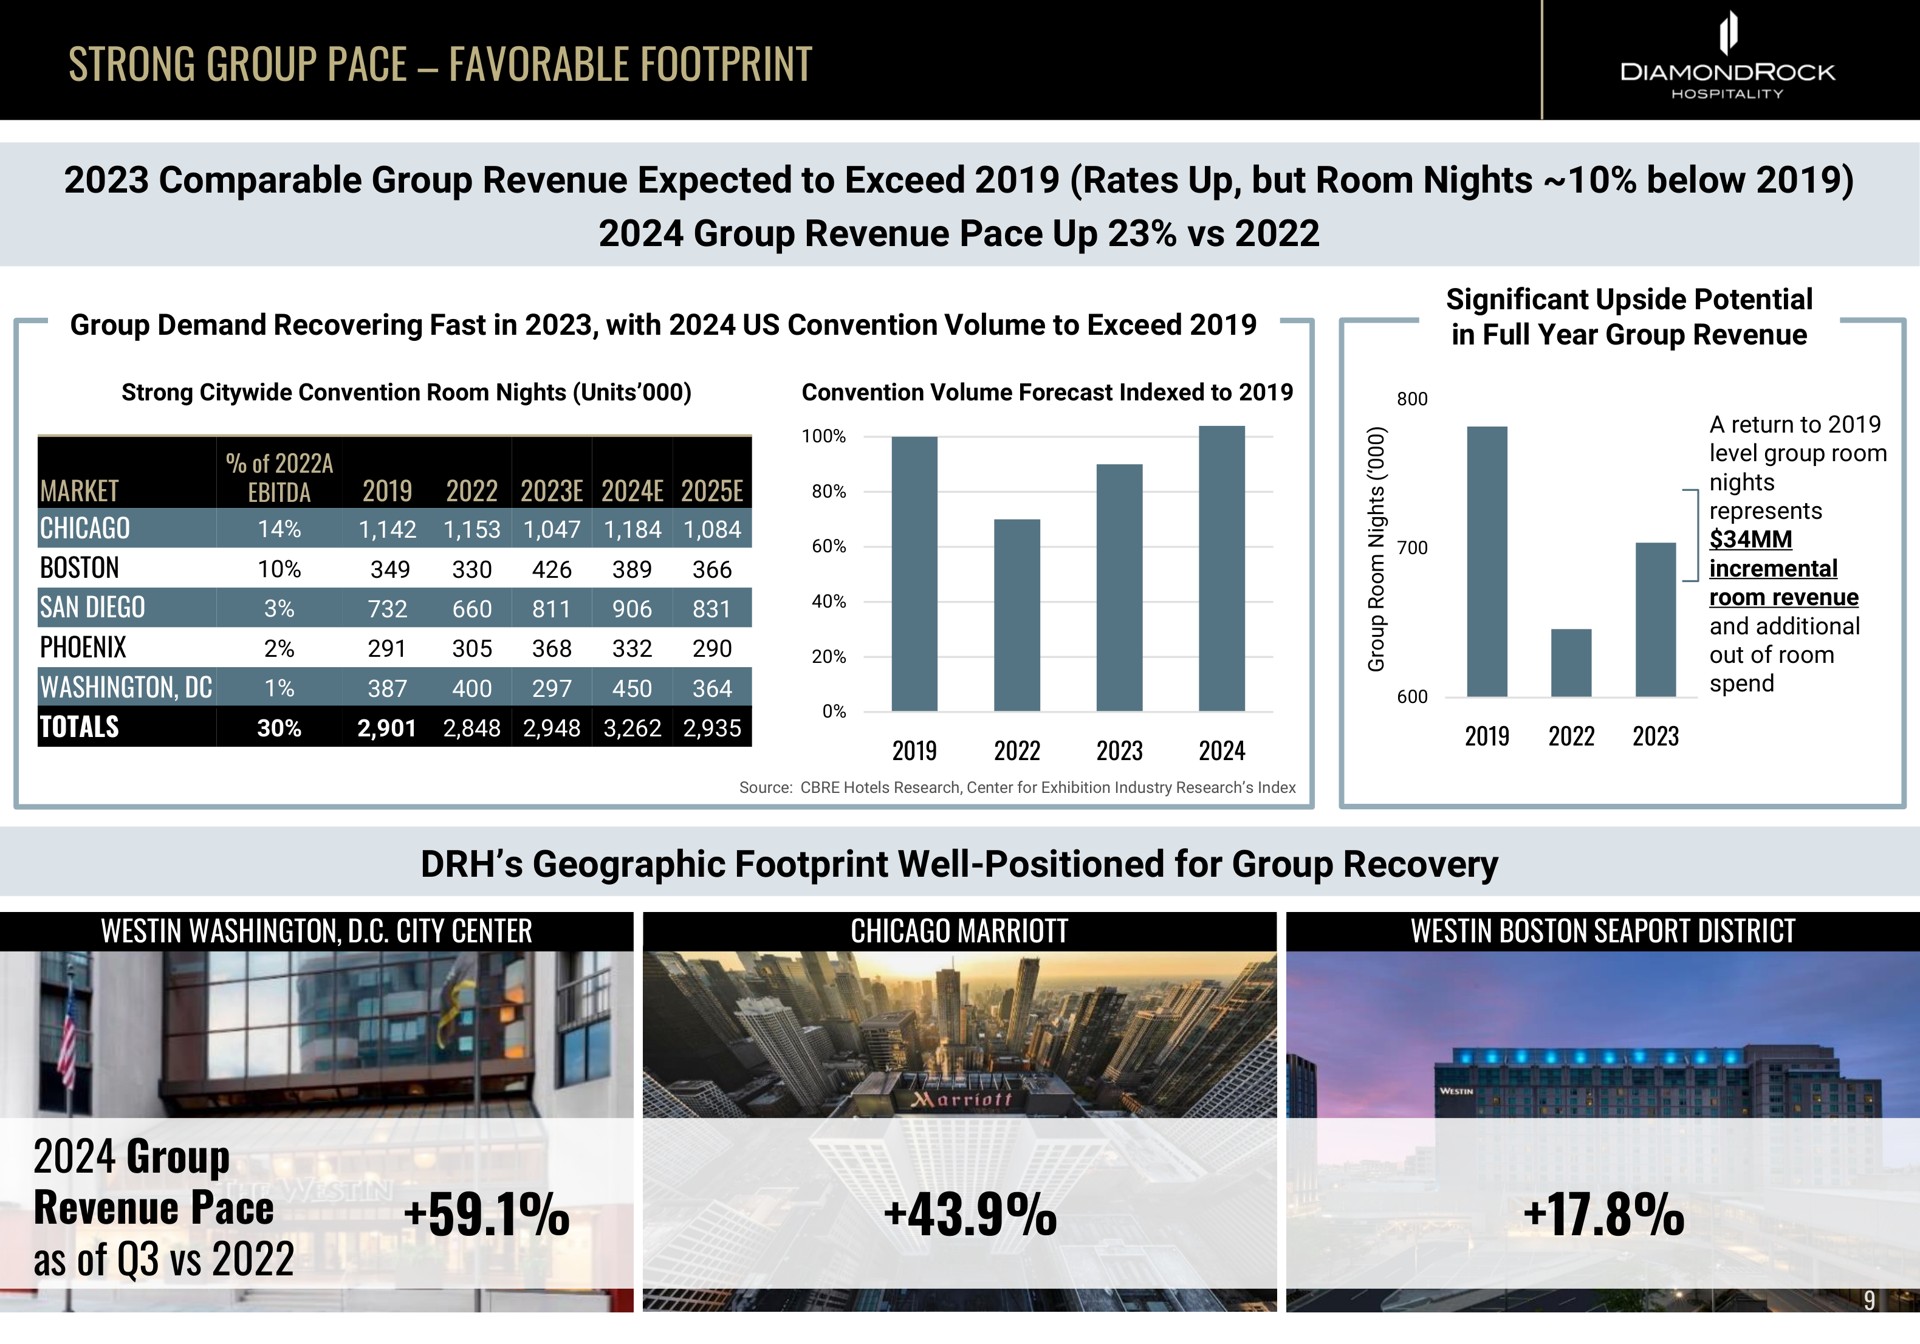 strong group pace favorable footprint comparable group revenue expected to exceed rates up but room nights below group revenue pace up geographic footprint well positioned for group recovery group revenue pace as of | DiamondRock Hospitality